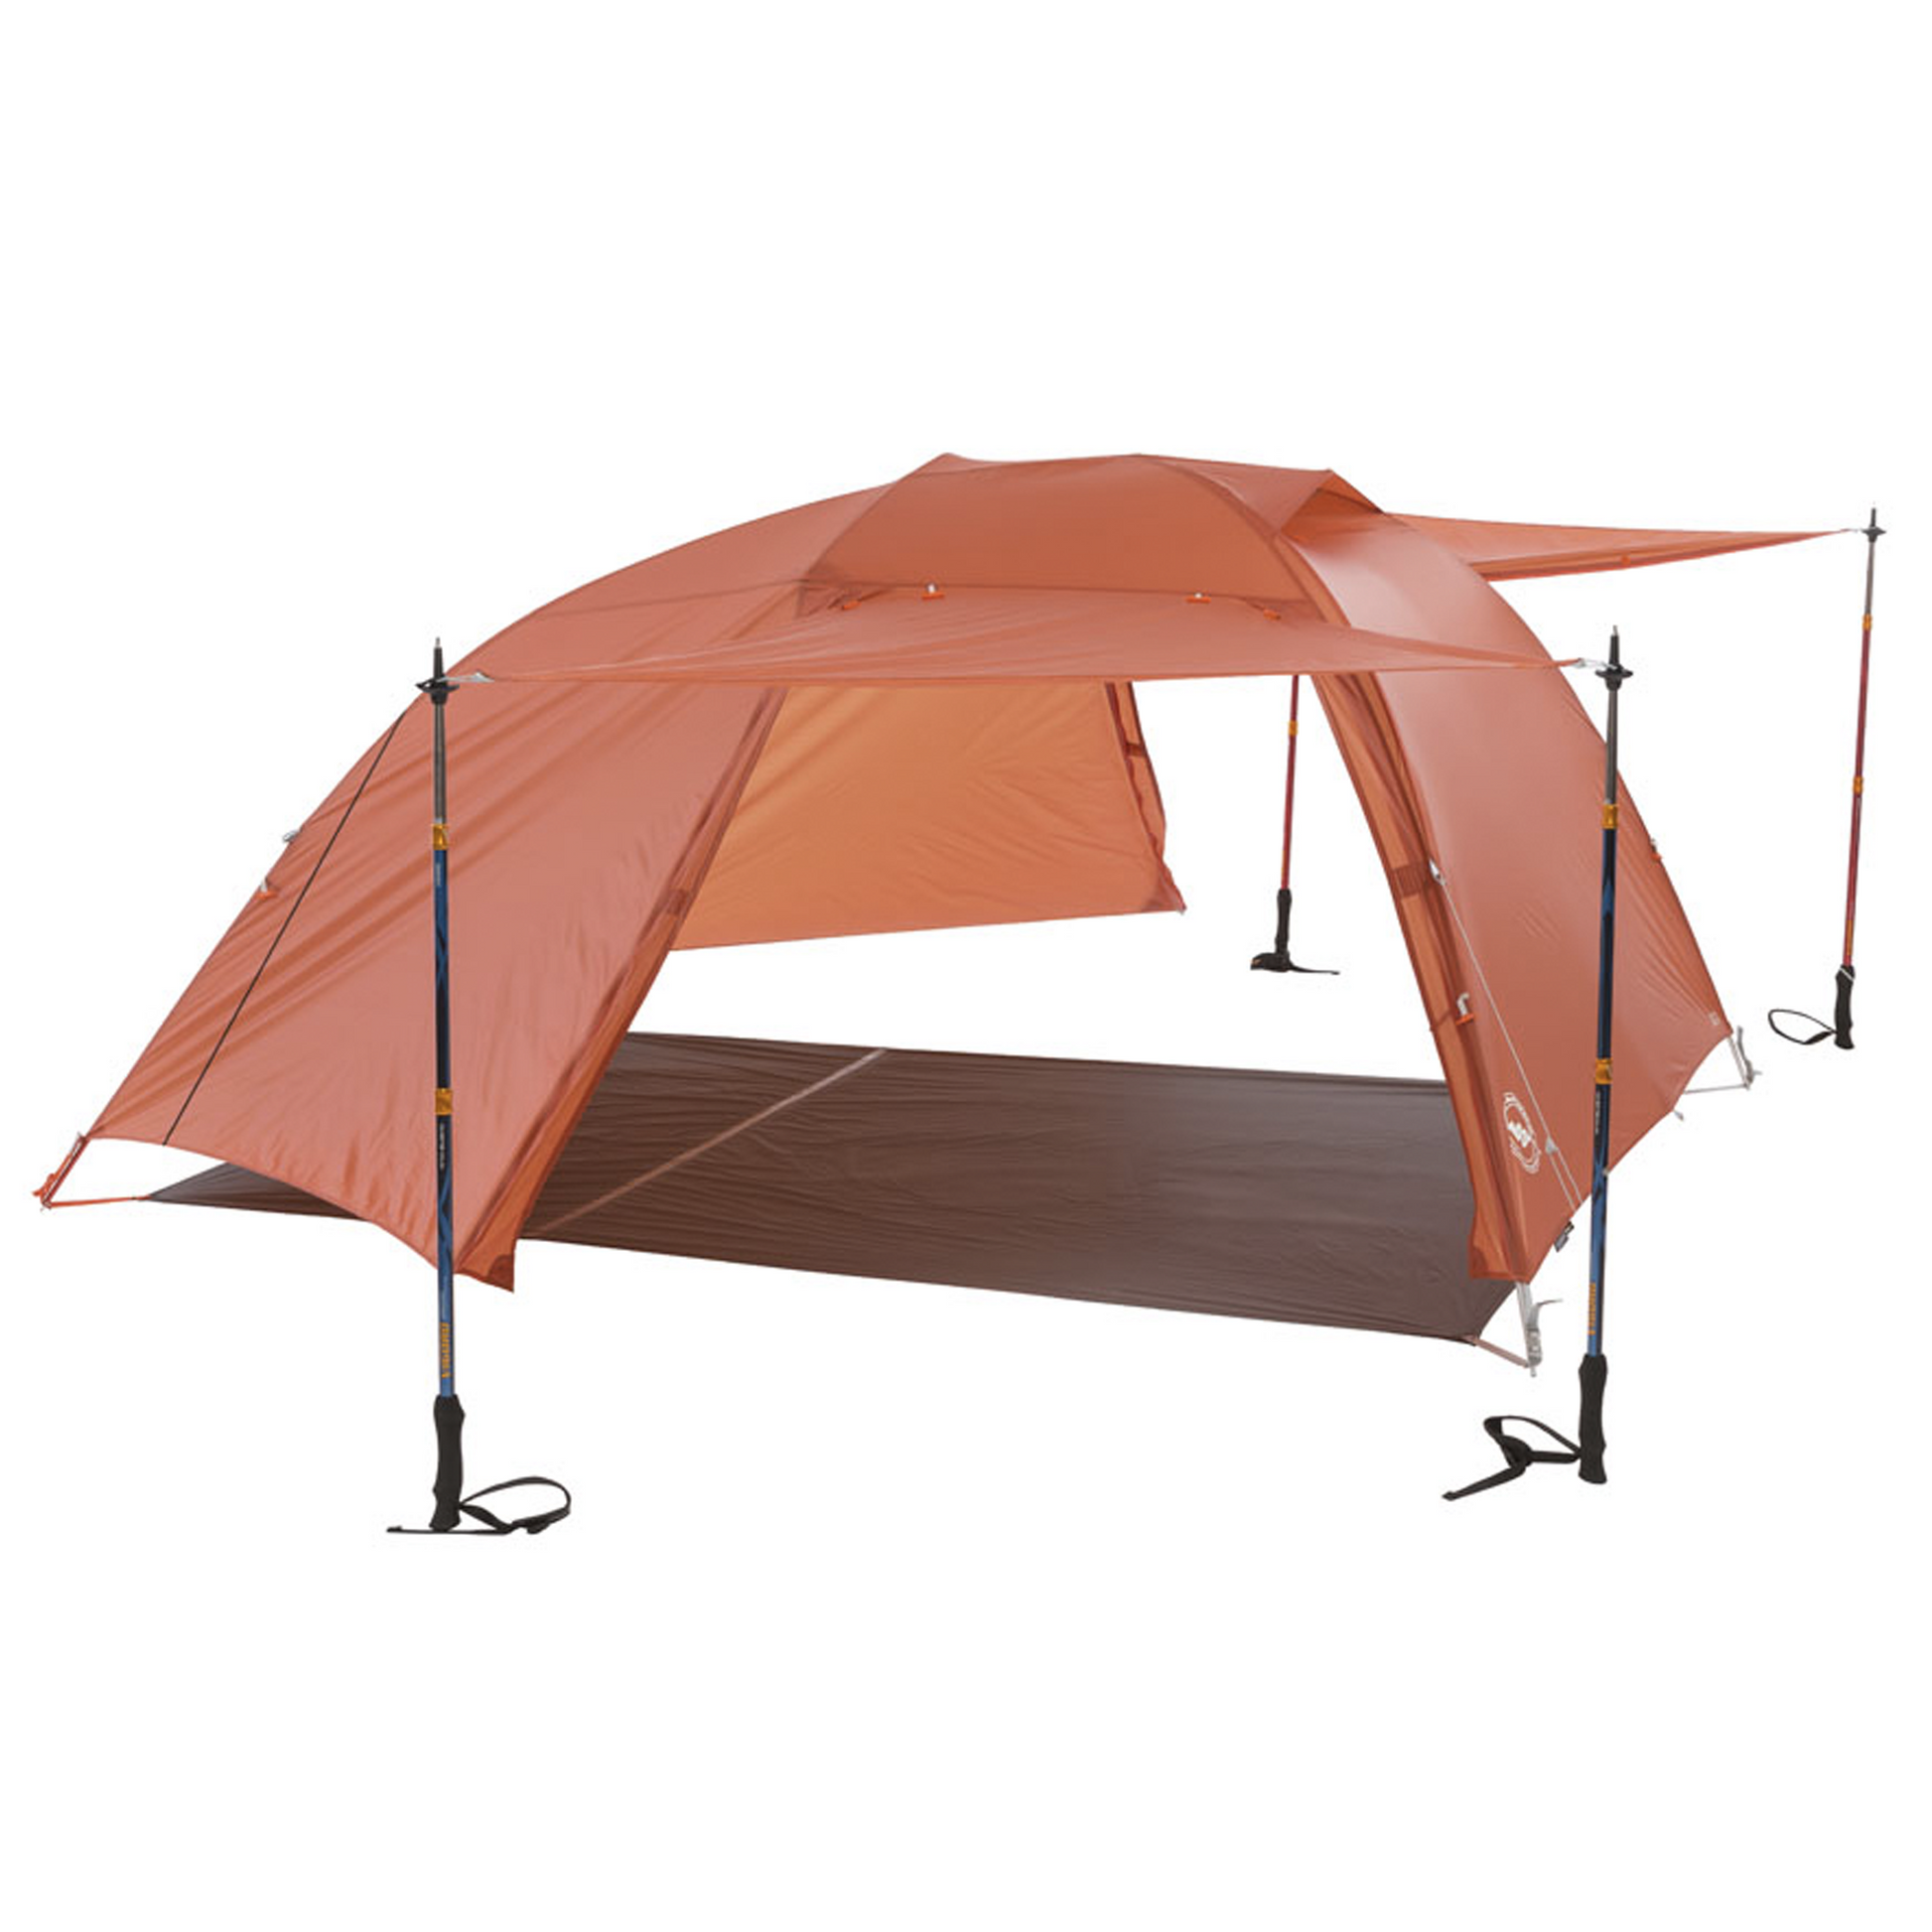 Copper Spur HV UL3 Big Adventure Outfitters